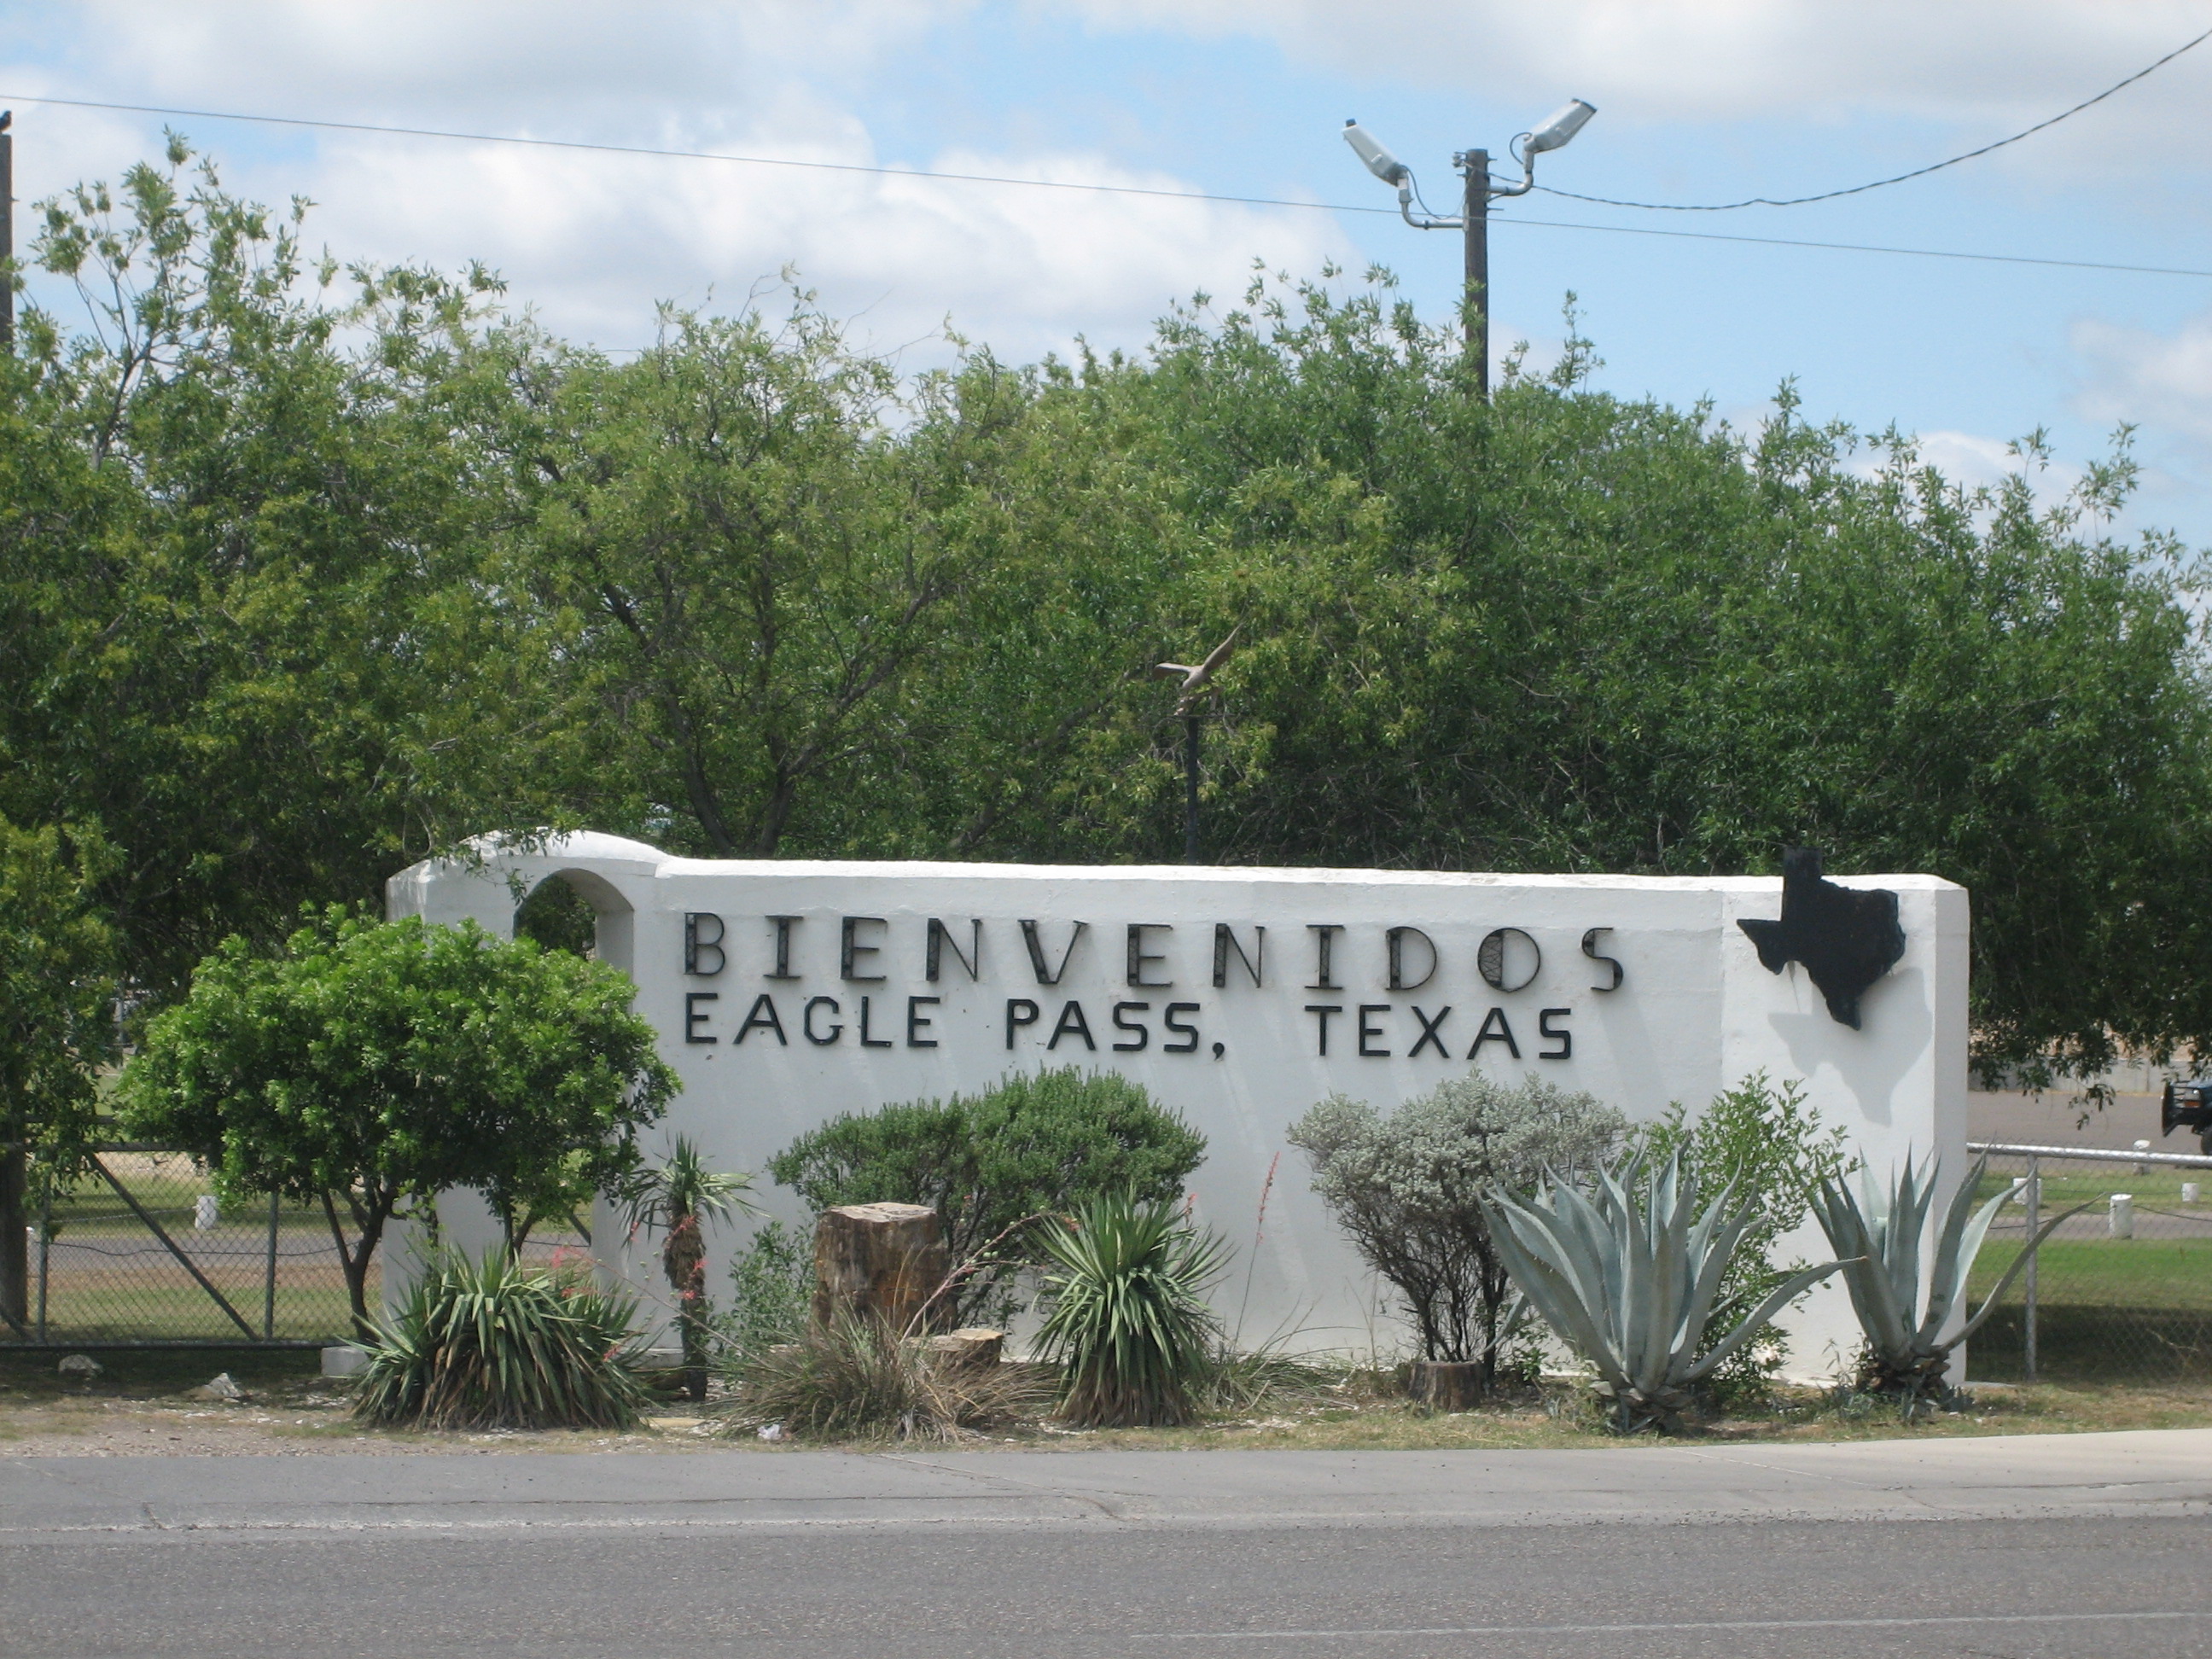 Eagle Pass is a city in and the county seat of Maverick County in the U.S. state of Texas. Its population was 28,130 as of the 2020 census.Eagle Pass borders the city of Piedras Negras, Coahuila, Mexico, which is to the southwest and across the Rio Grande. The Eagle Pass-Piedras Negras metropolitan area (EP-PN) is one of six binational metropolitan areas along the United States-Mexican border. According to the 2020 Census, the Eagle Pass Micropolitan Area population was 57,887 people, and the Piedras Negras Metropolitan Area population was 209,456 inhabitants.